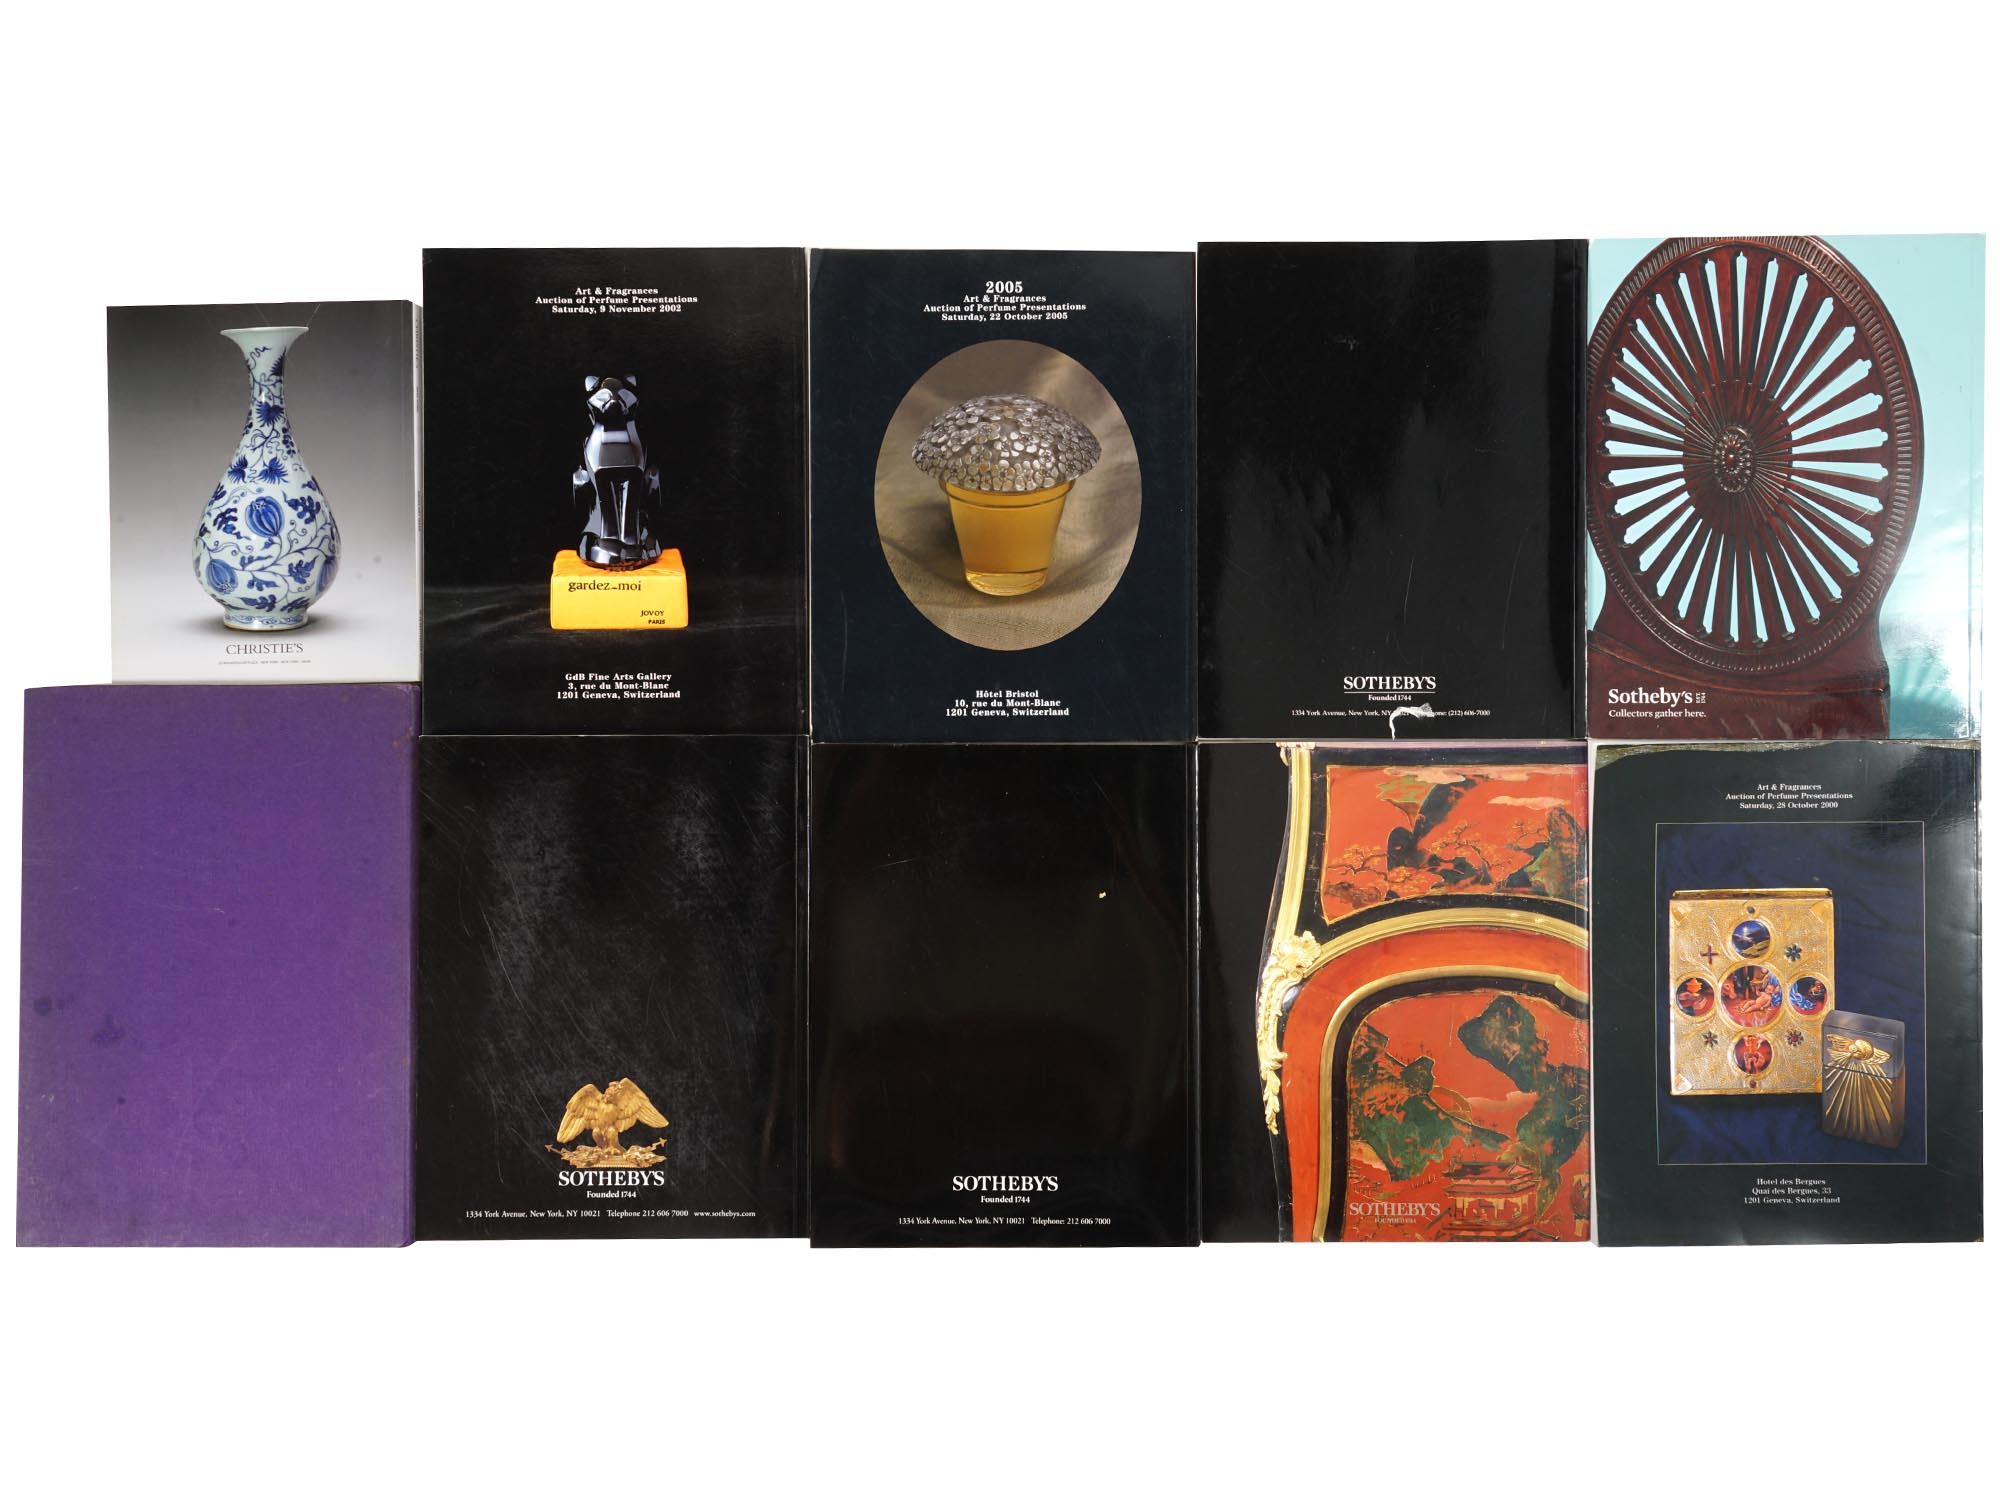 SOTHEBYS AND PERFUME PRESENTATIONS AUCTION CATALOGS PIC-2